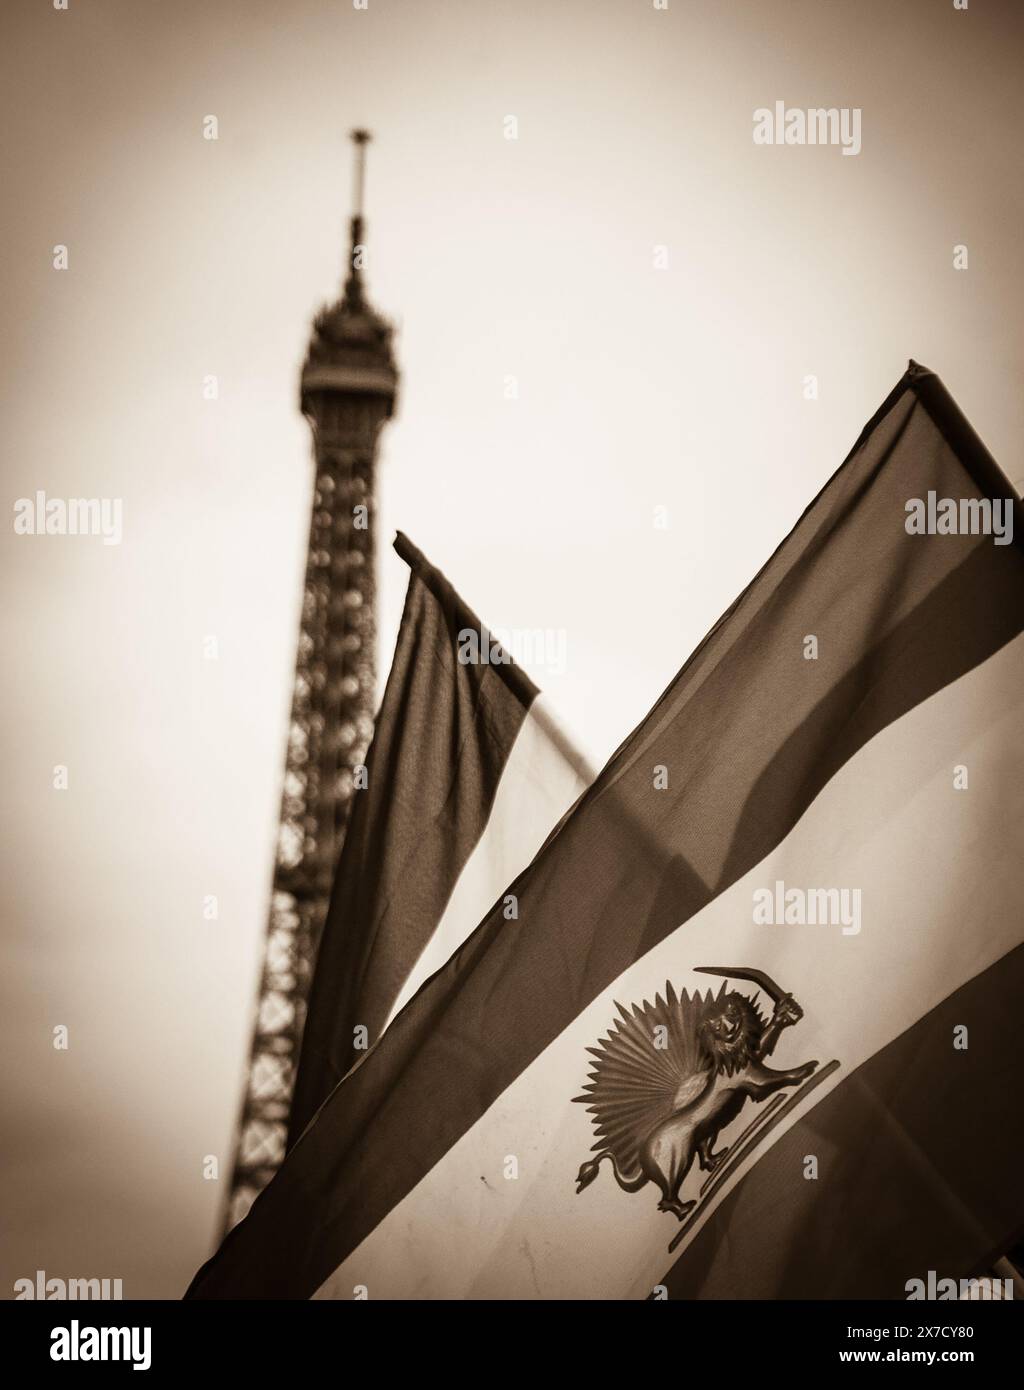 Old Iranian flag (Iran's flag under the former Shah regime) and Eiffel tower at background. Demonstration in Paris, France. Sepia historic photo. Stock Photo